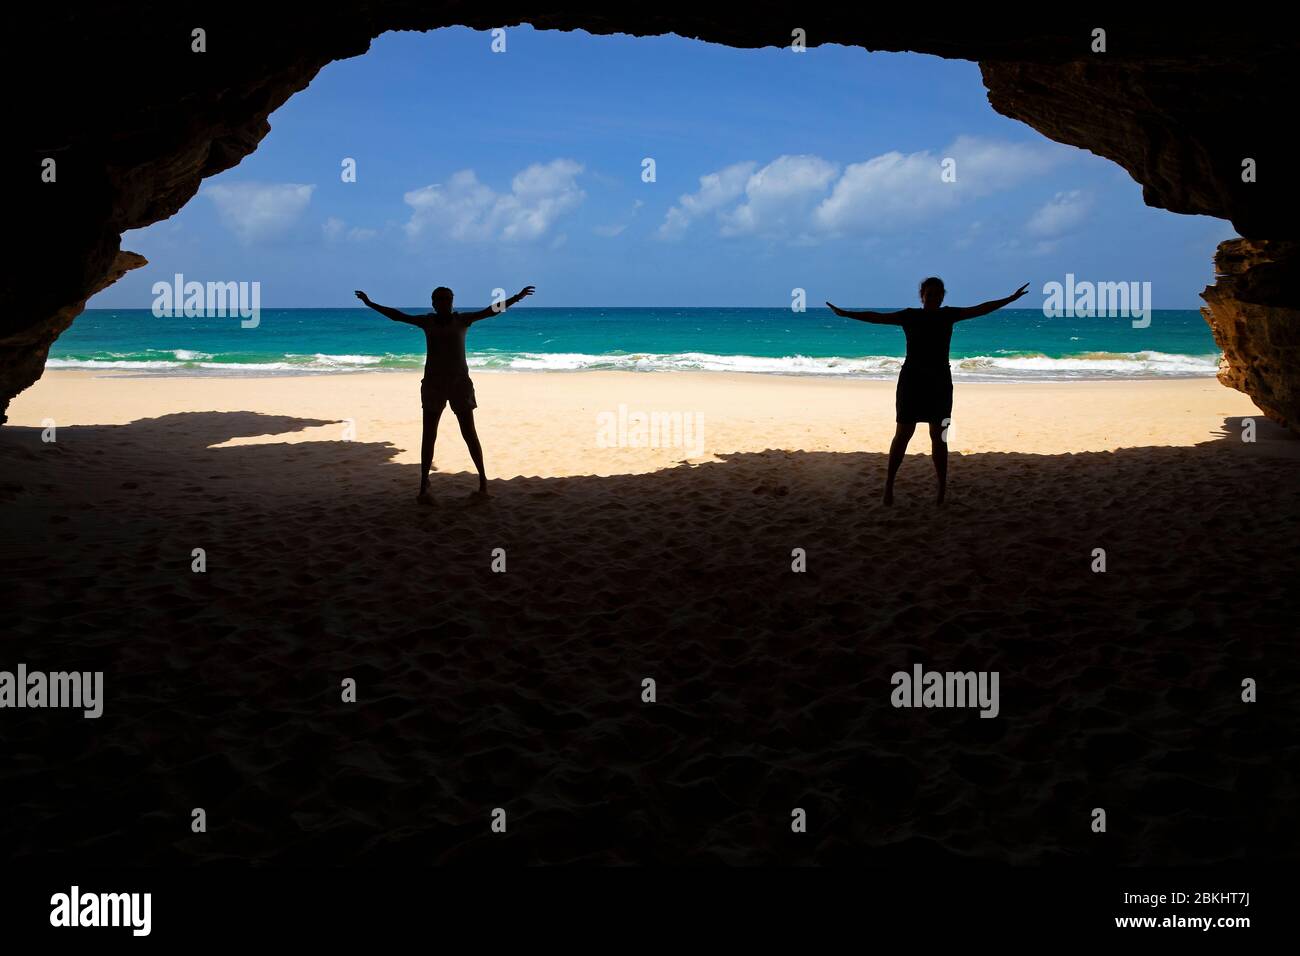 Two tourists silhouetted at entrance of sea cave at Praia de Santa Mónica, sandy beach on the island of Boa Vista, Cape Verde / Cabo Verde Stock Photo